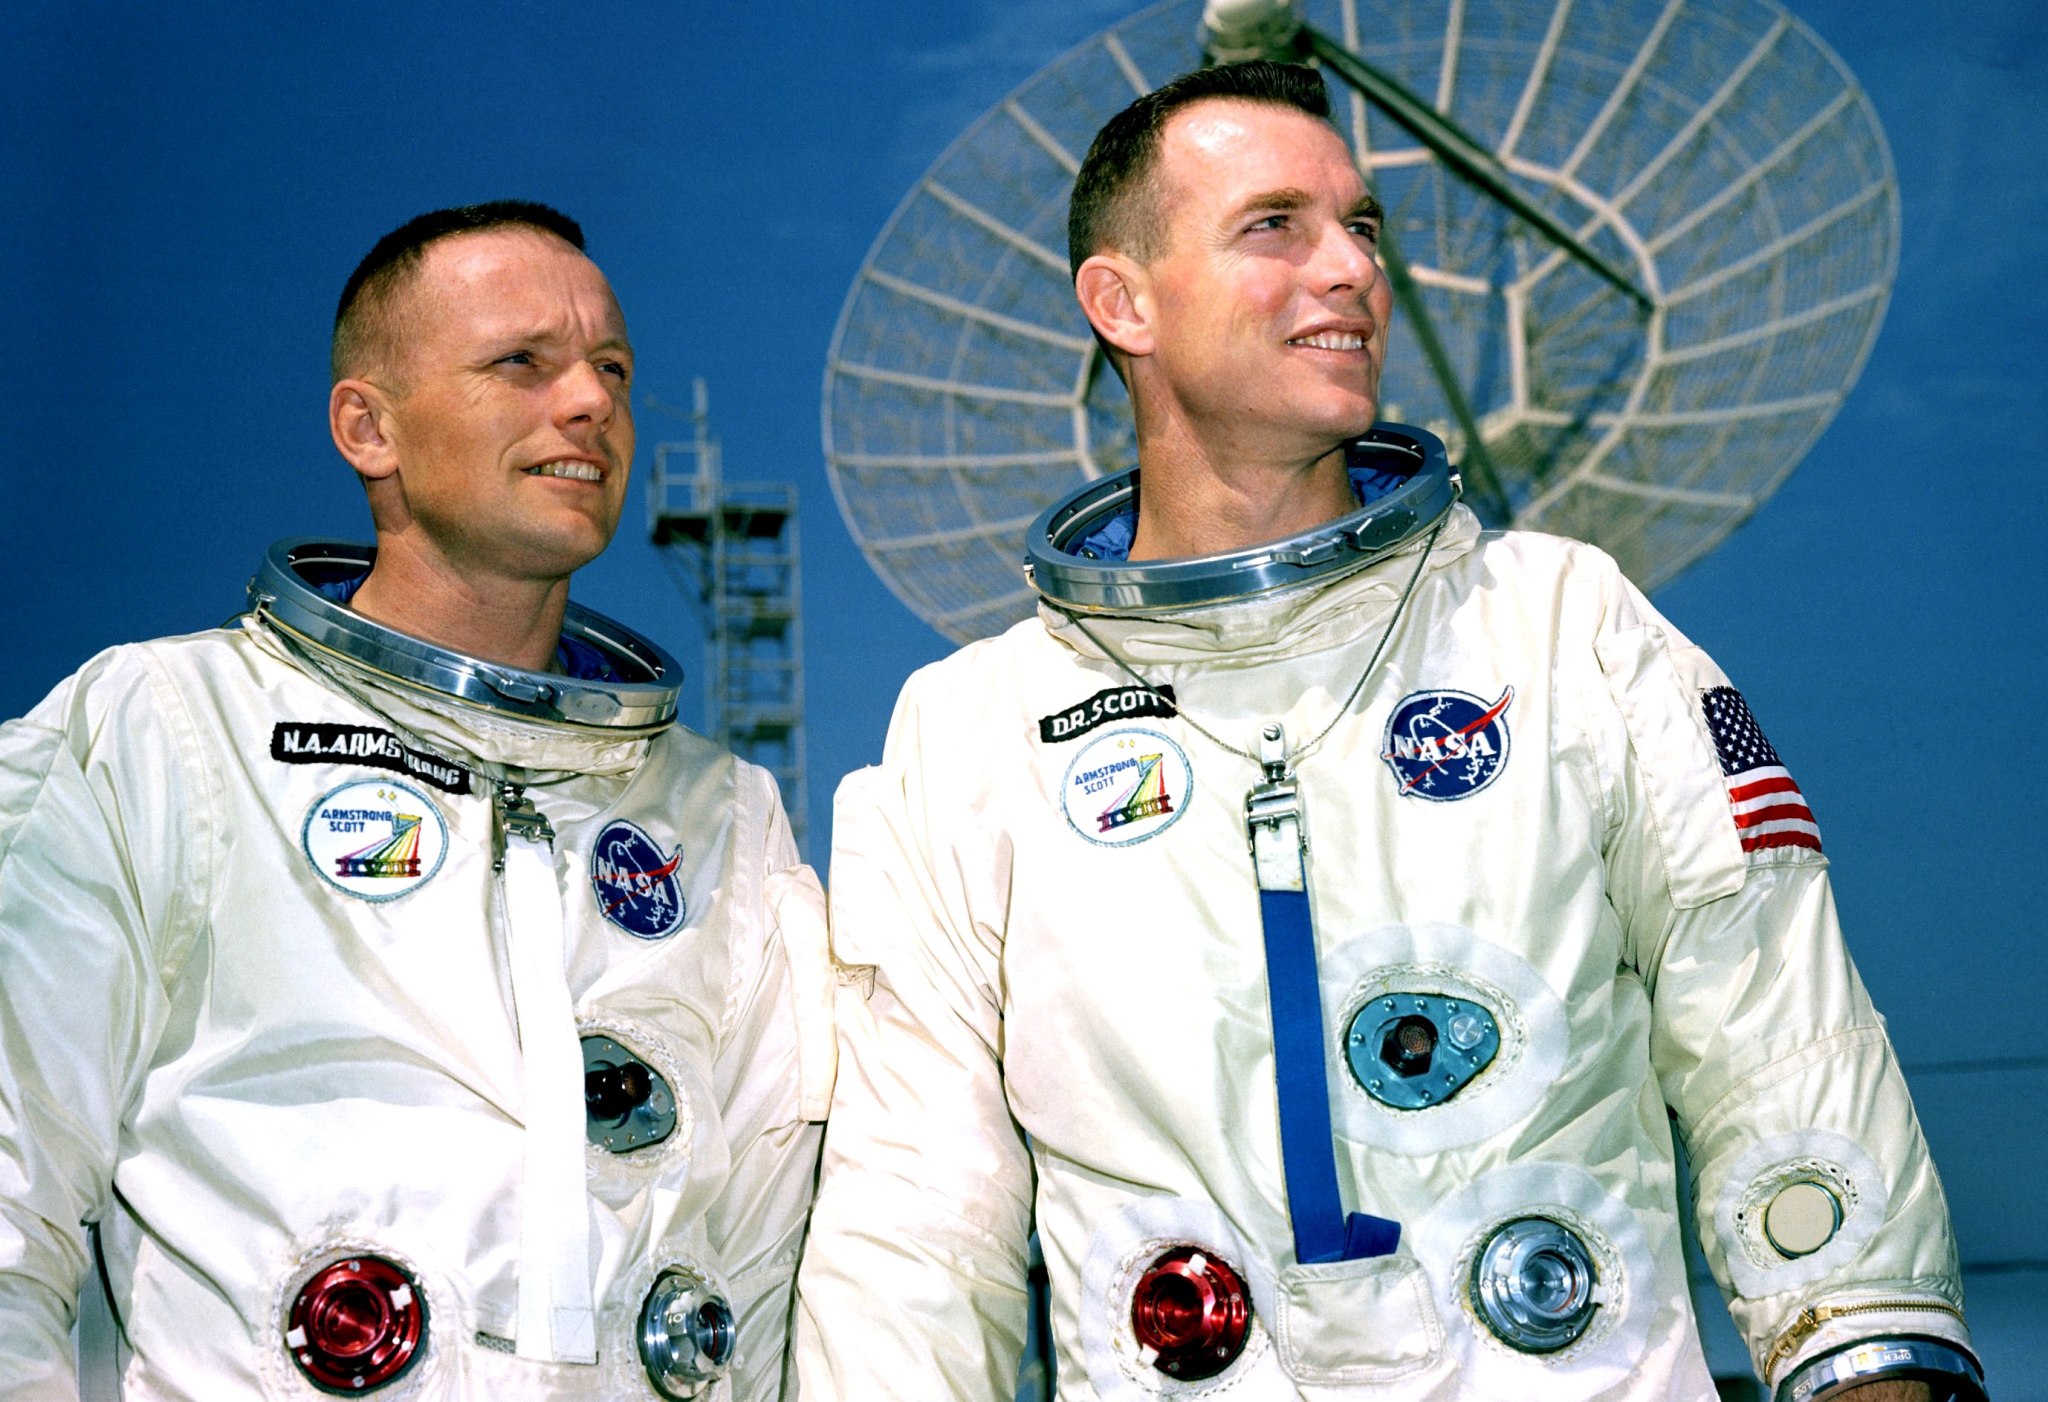 Neil Armstrong and David Scott